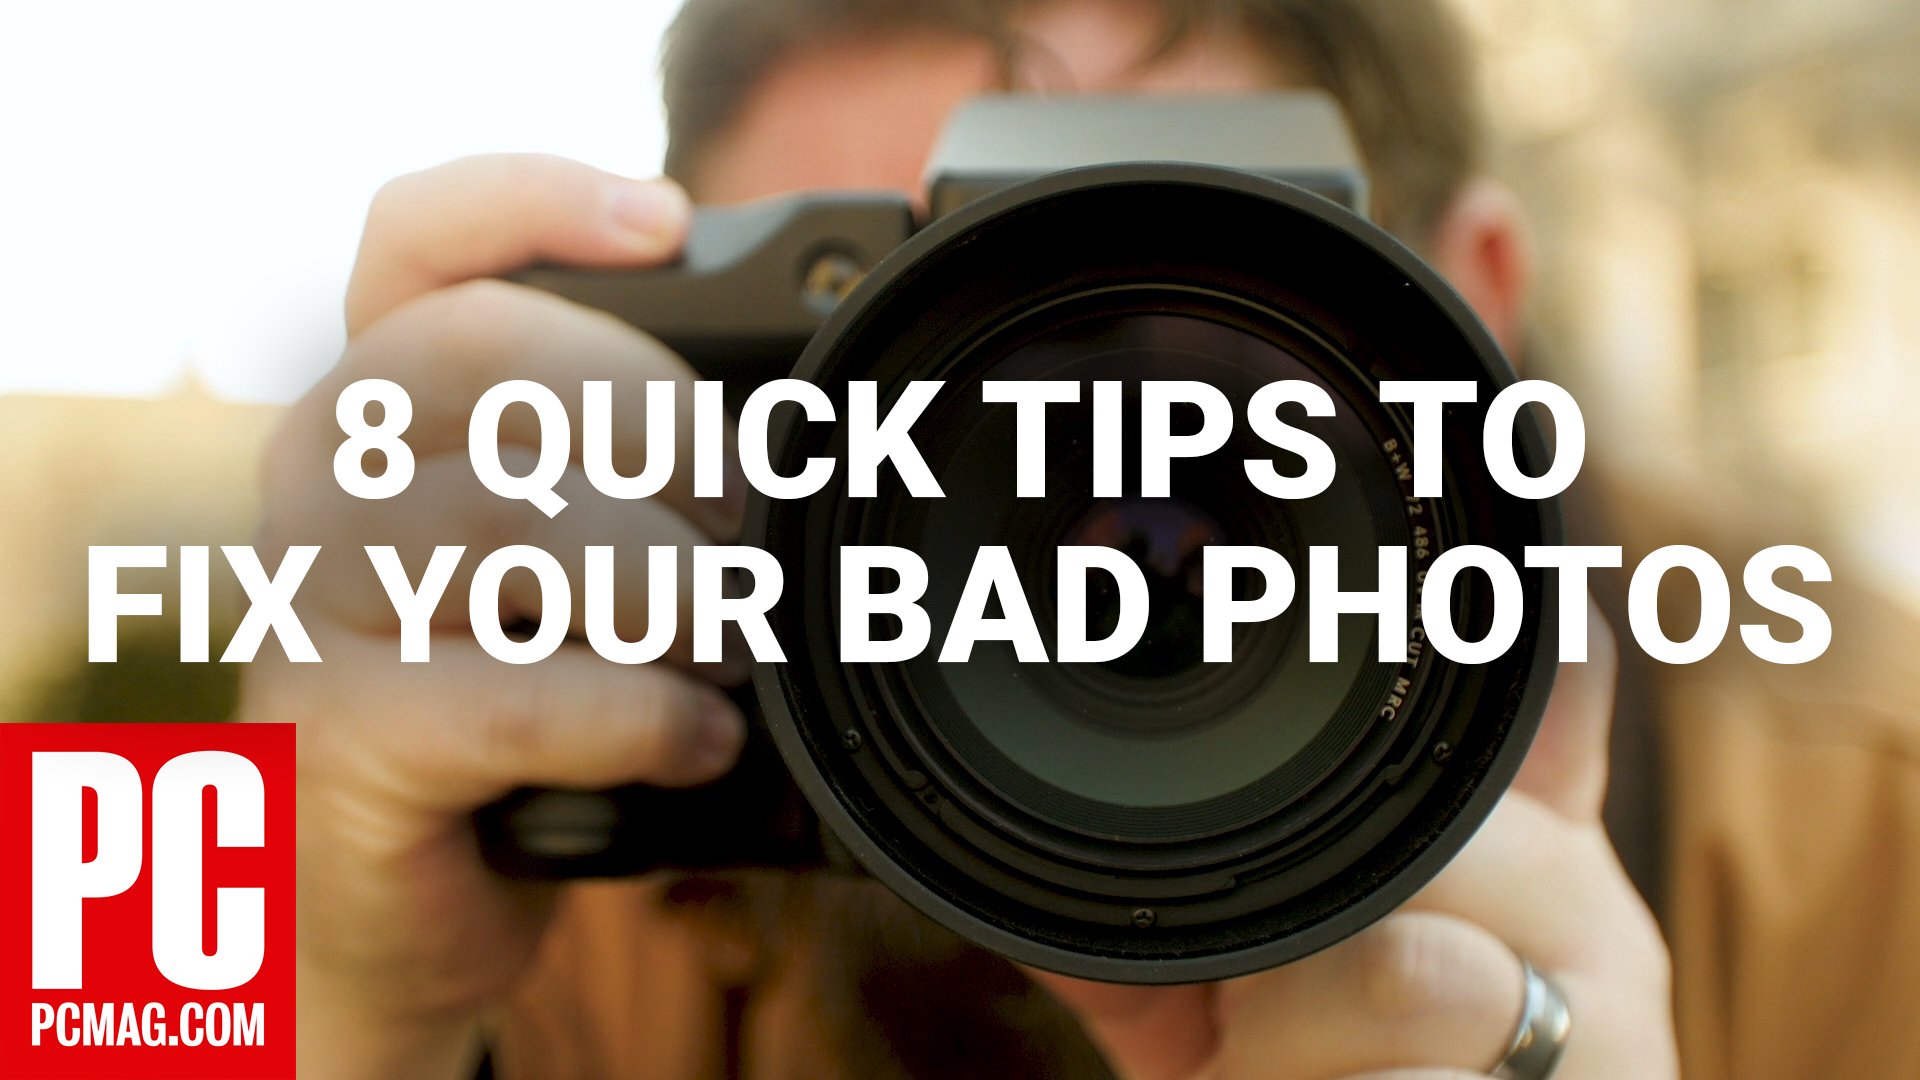 8 Quick Tips to Fix Your Bad Photos